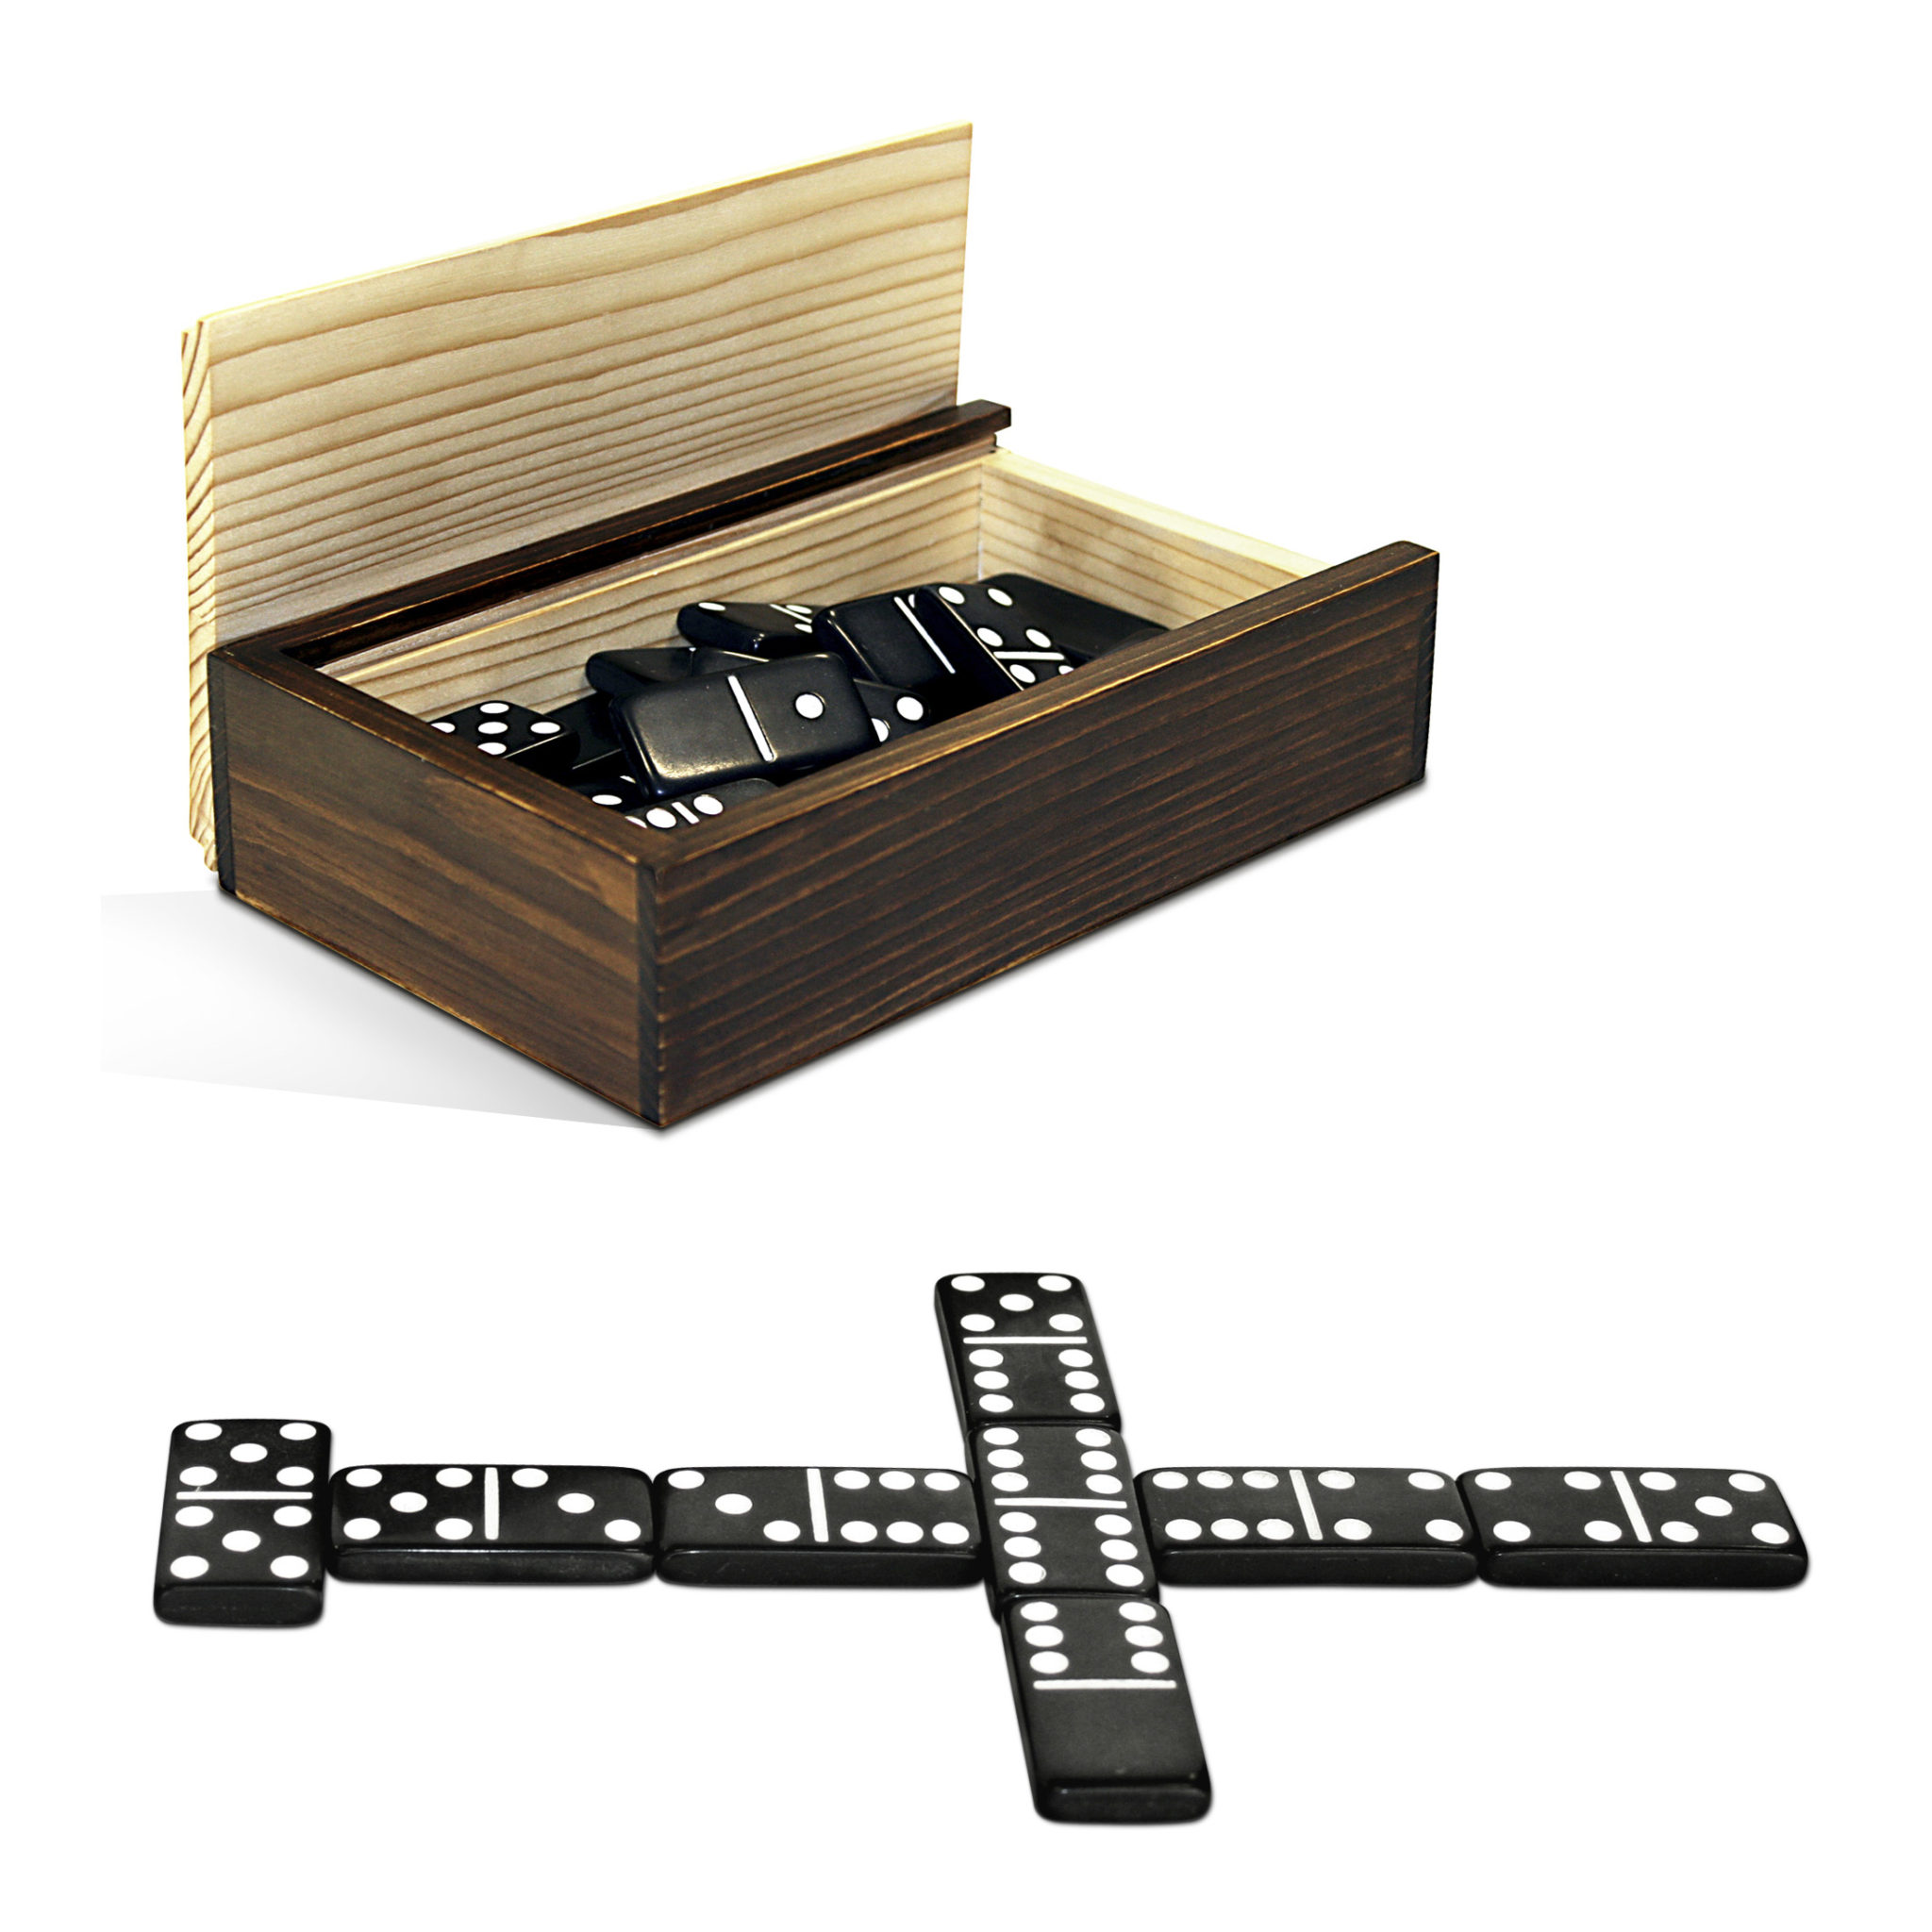 Man Cave,FREE Domino CASE Details about   NEW zebra Black & White Dominoes Double 6,Board Game 